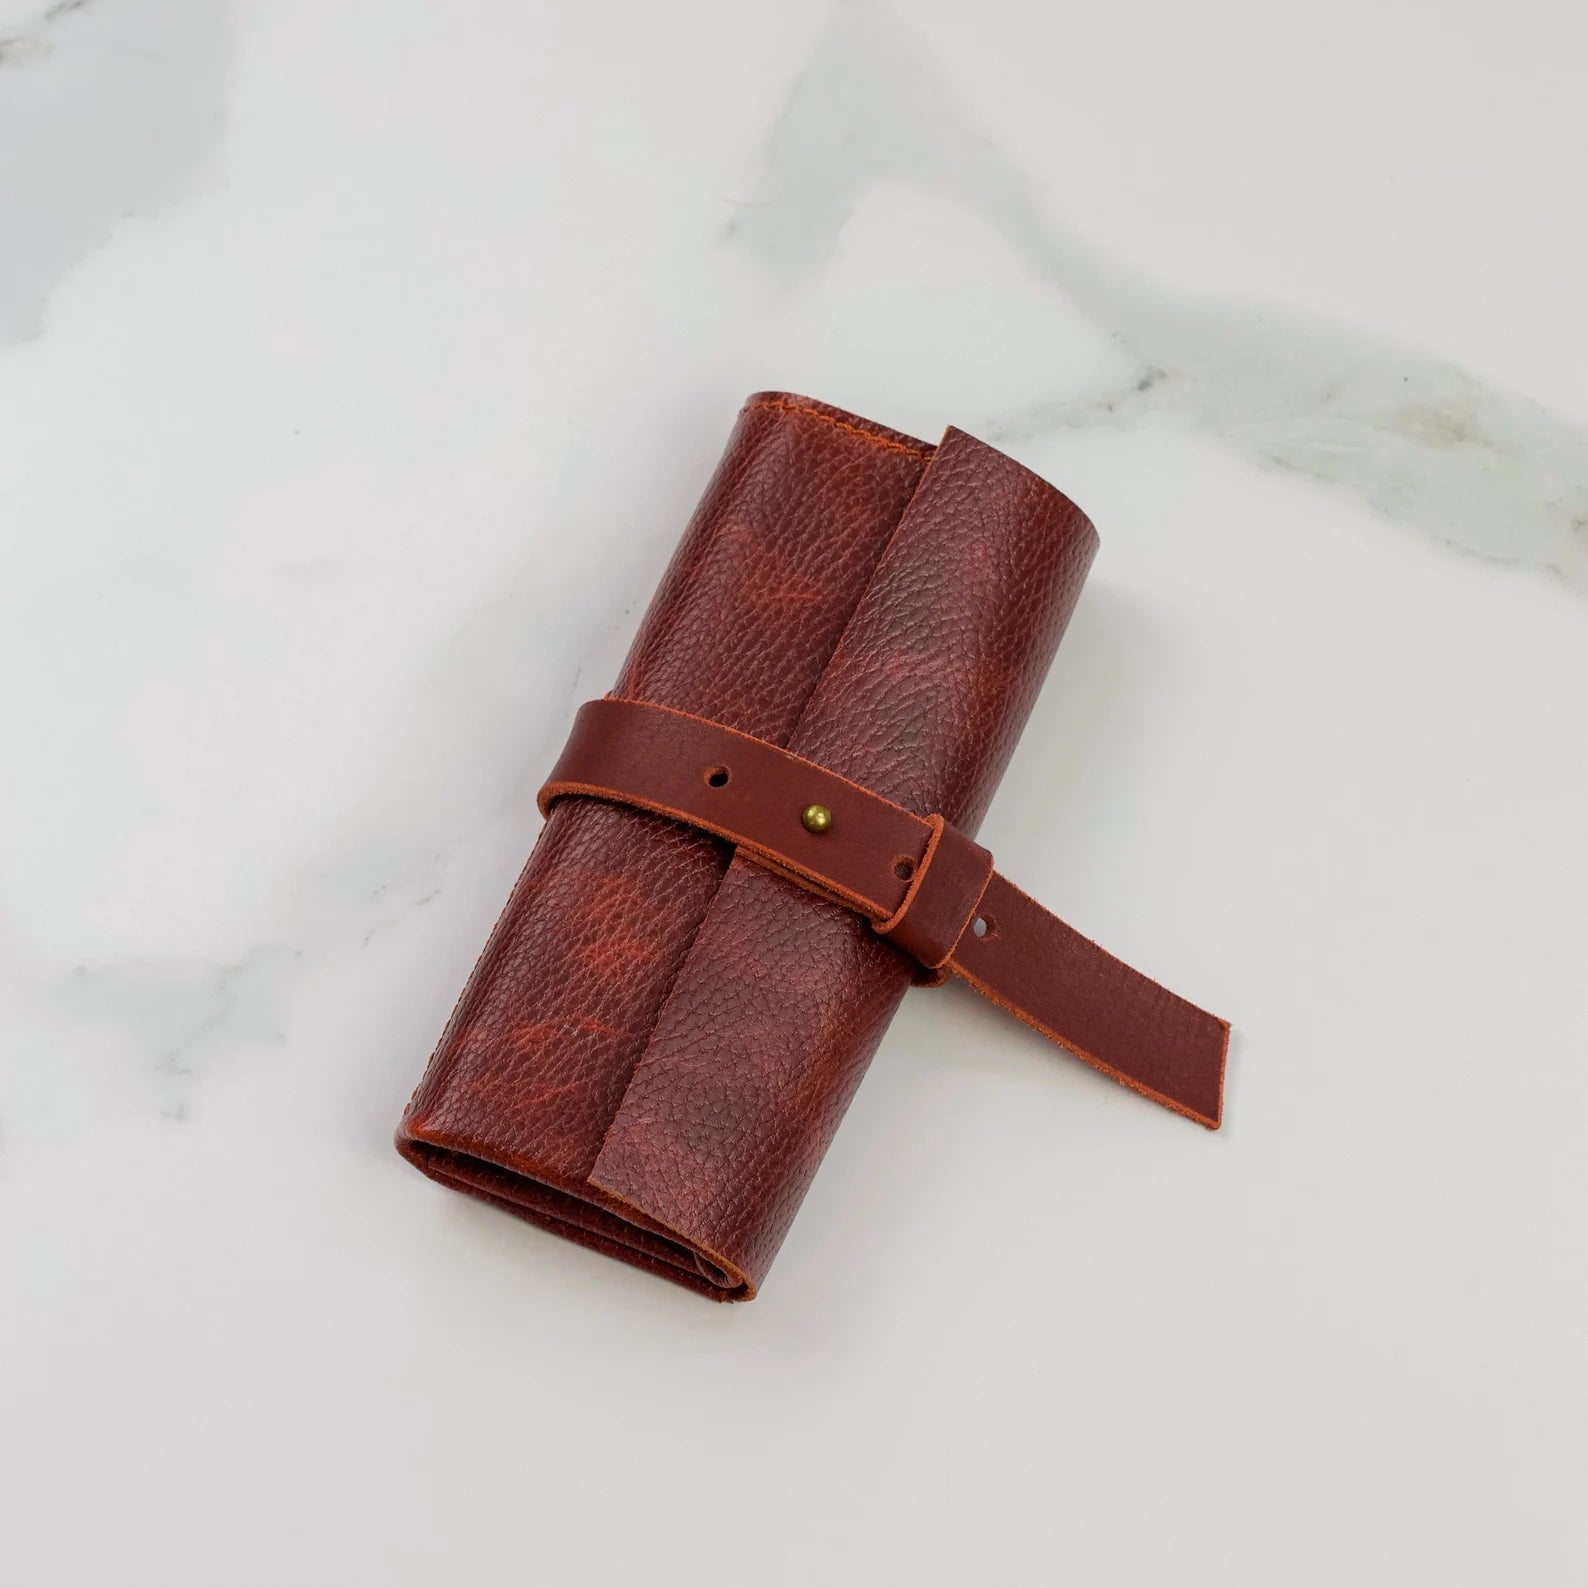 High quality leather watch rolls for up to three watches